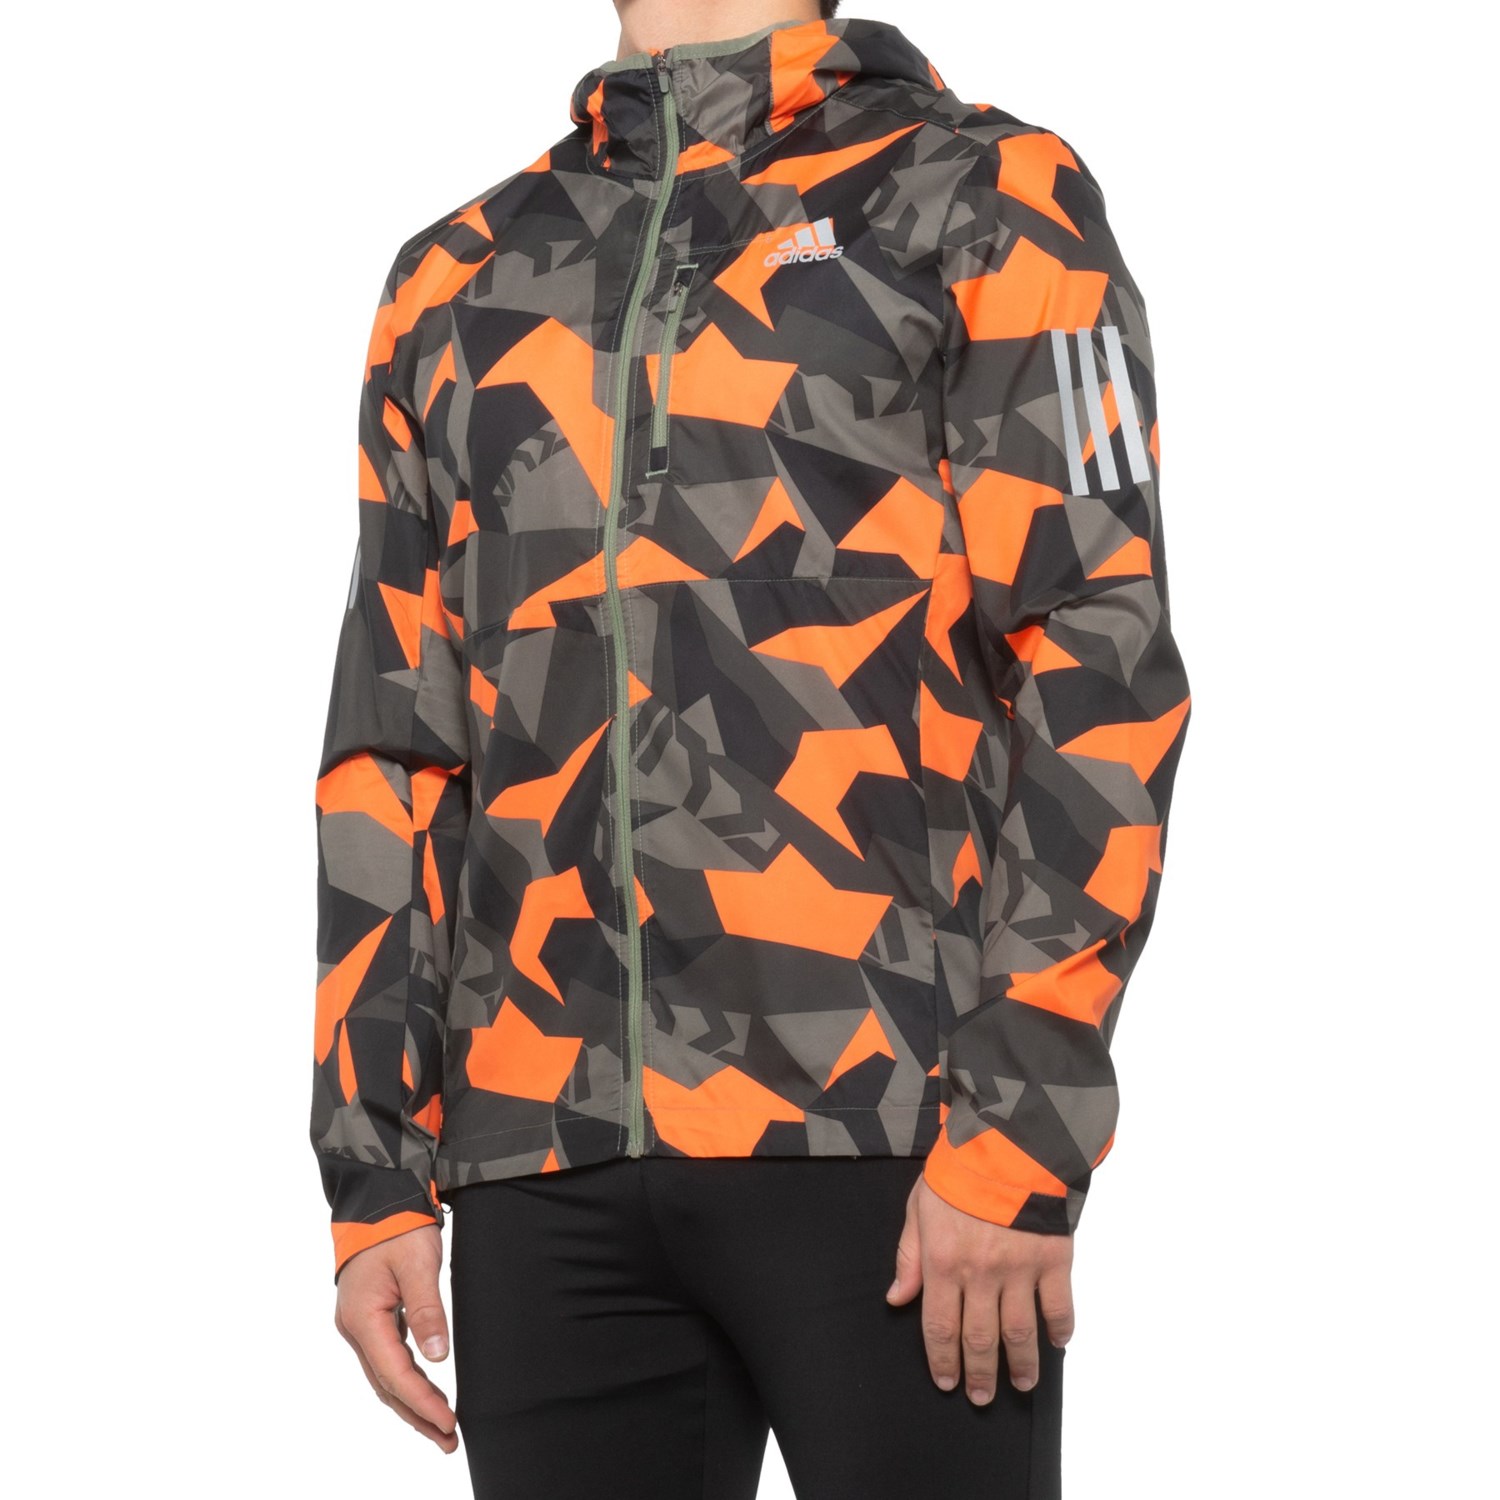 adidas Own the Run Jacket (For Men) - Save 21%